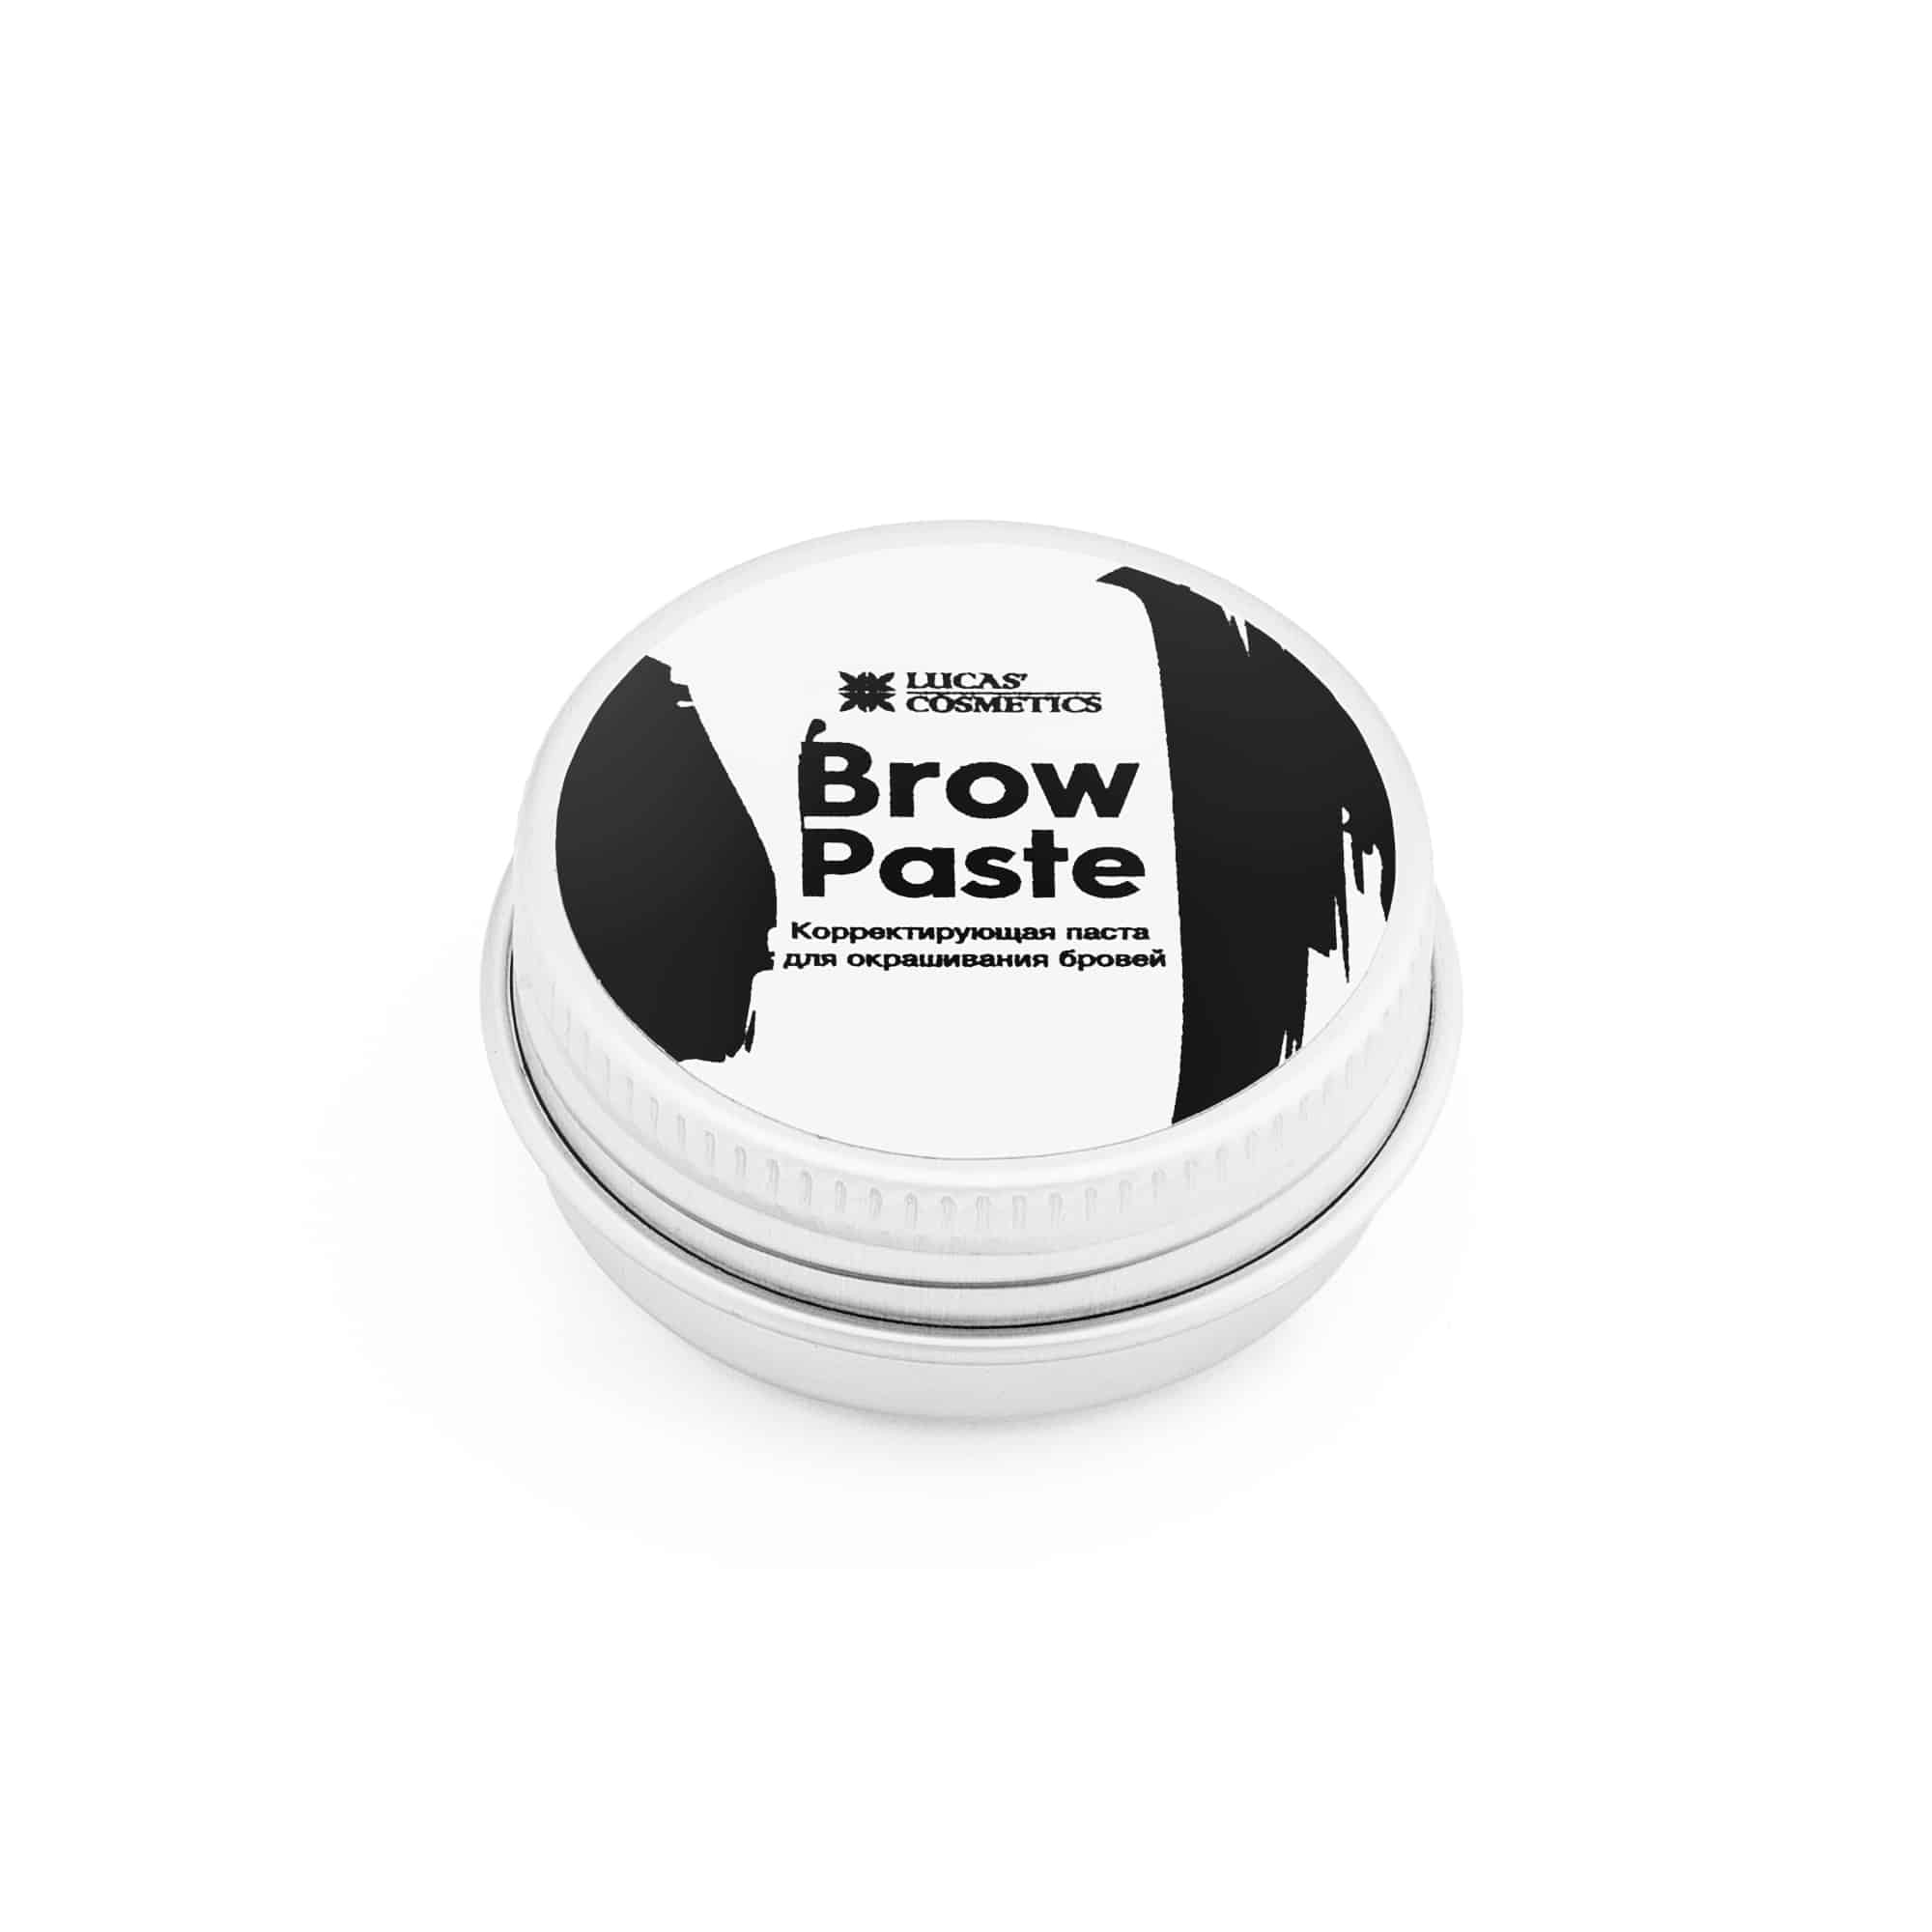 Brow Paste by CC Brow, 15g.